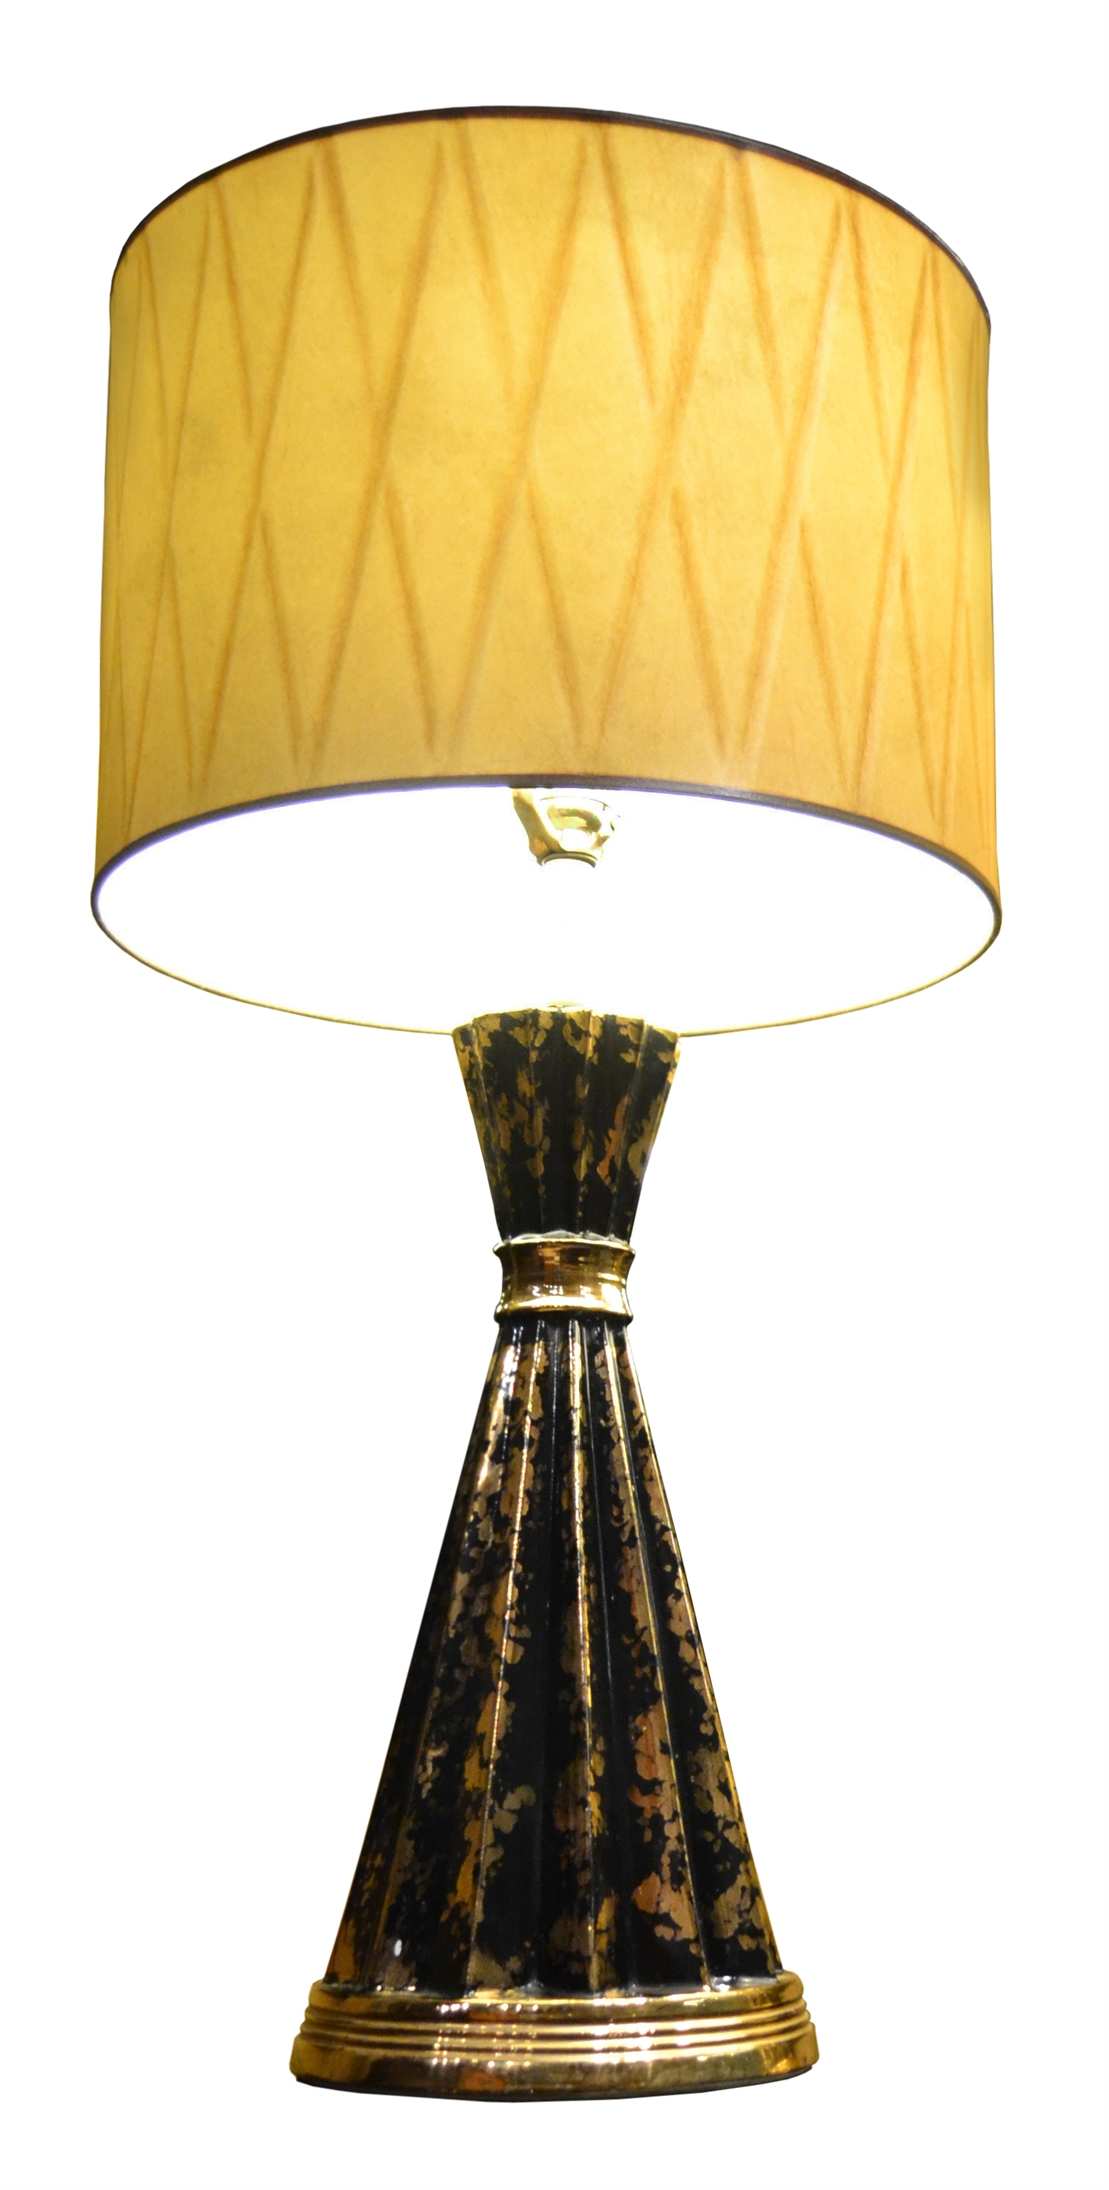 MB/3060 - Pair of Black & Gold Lamps with X Shades